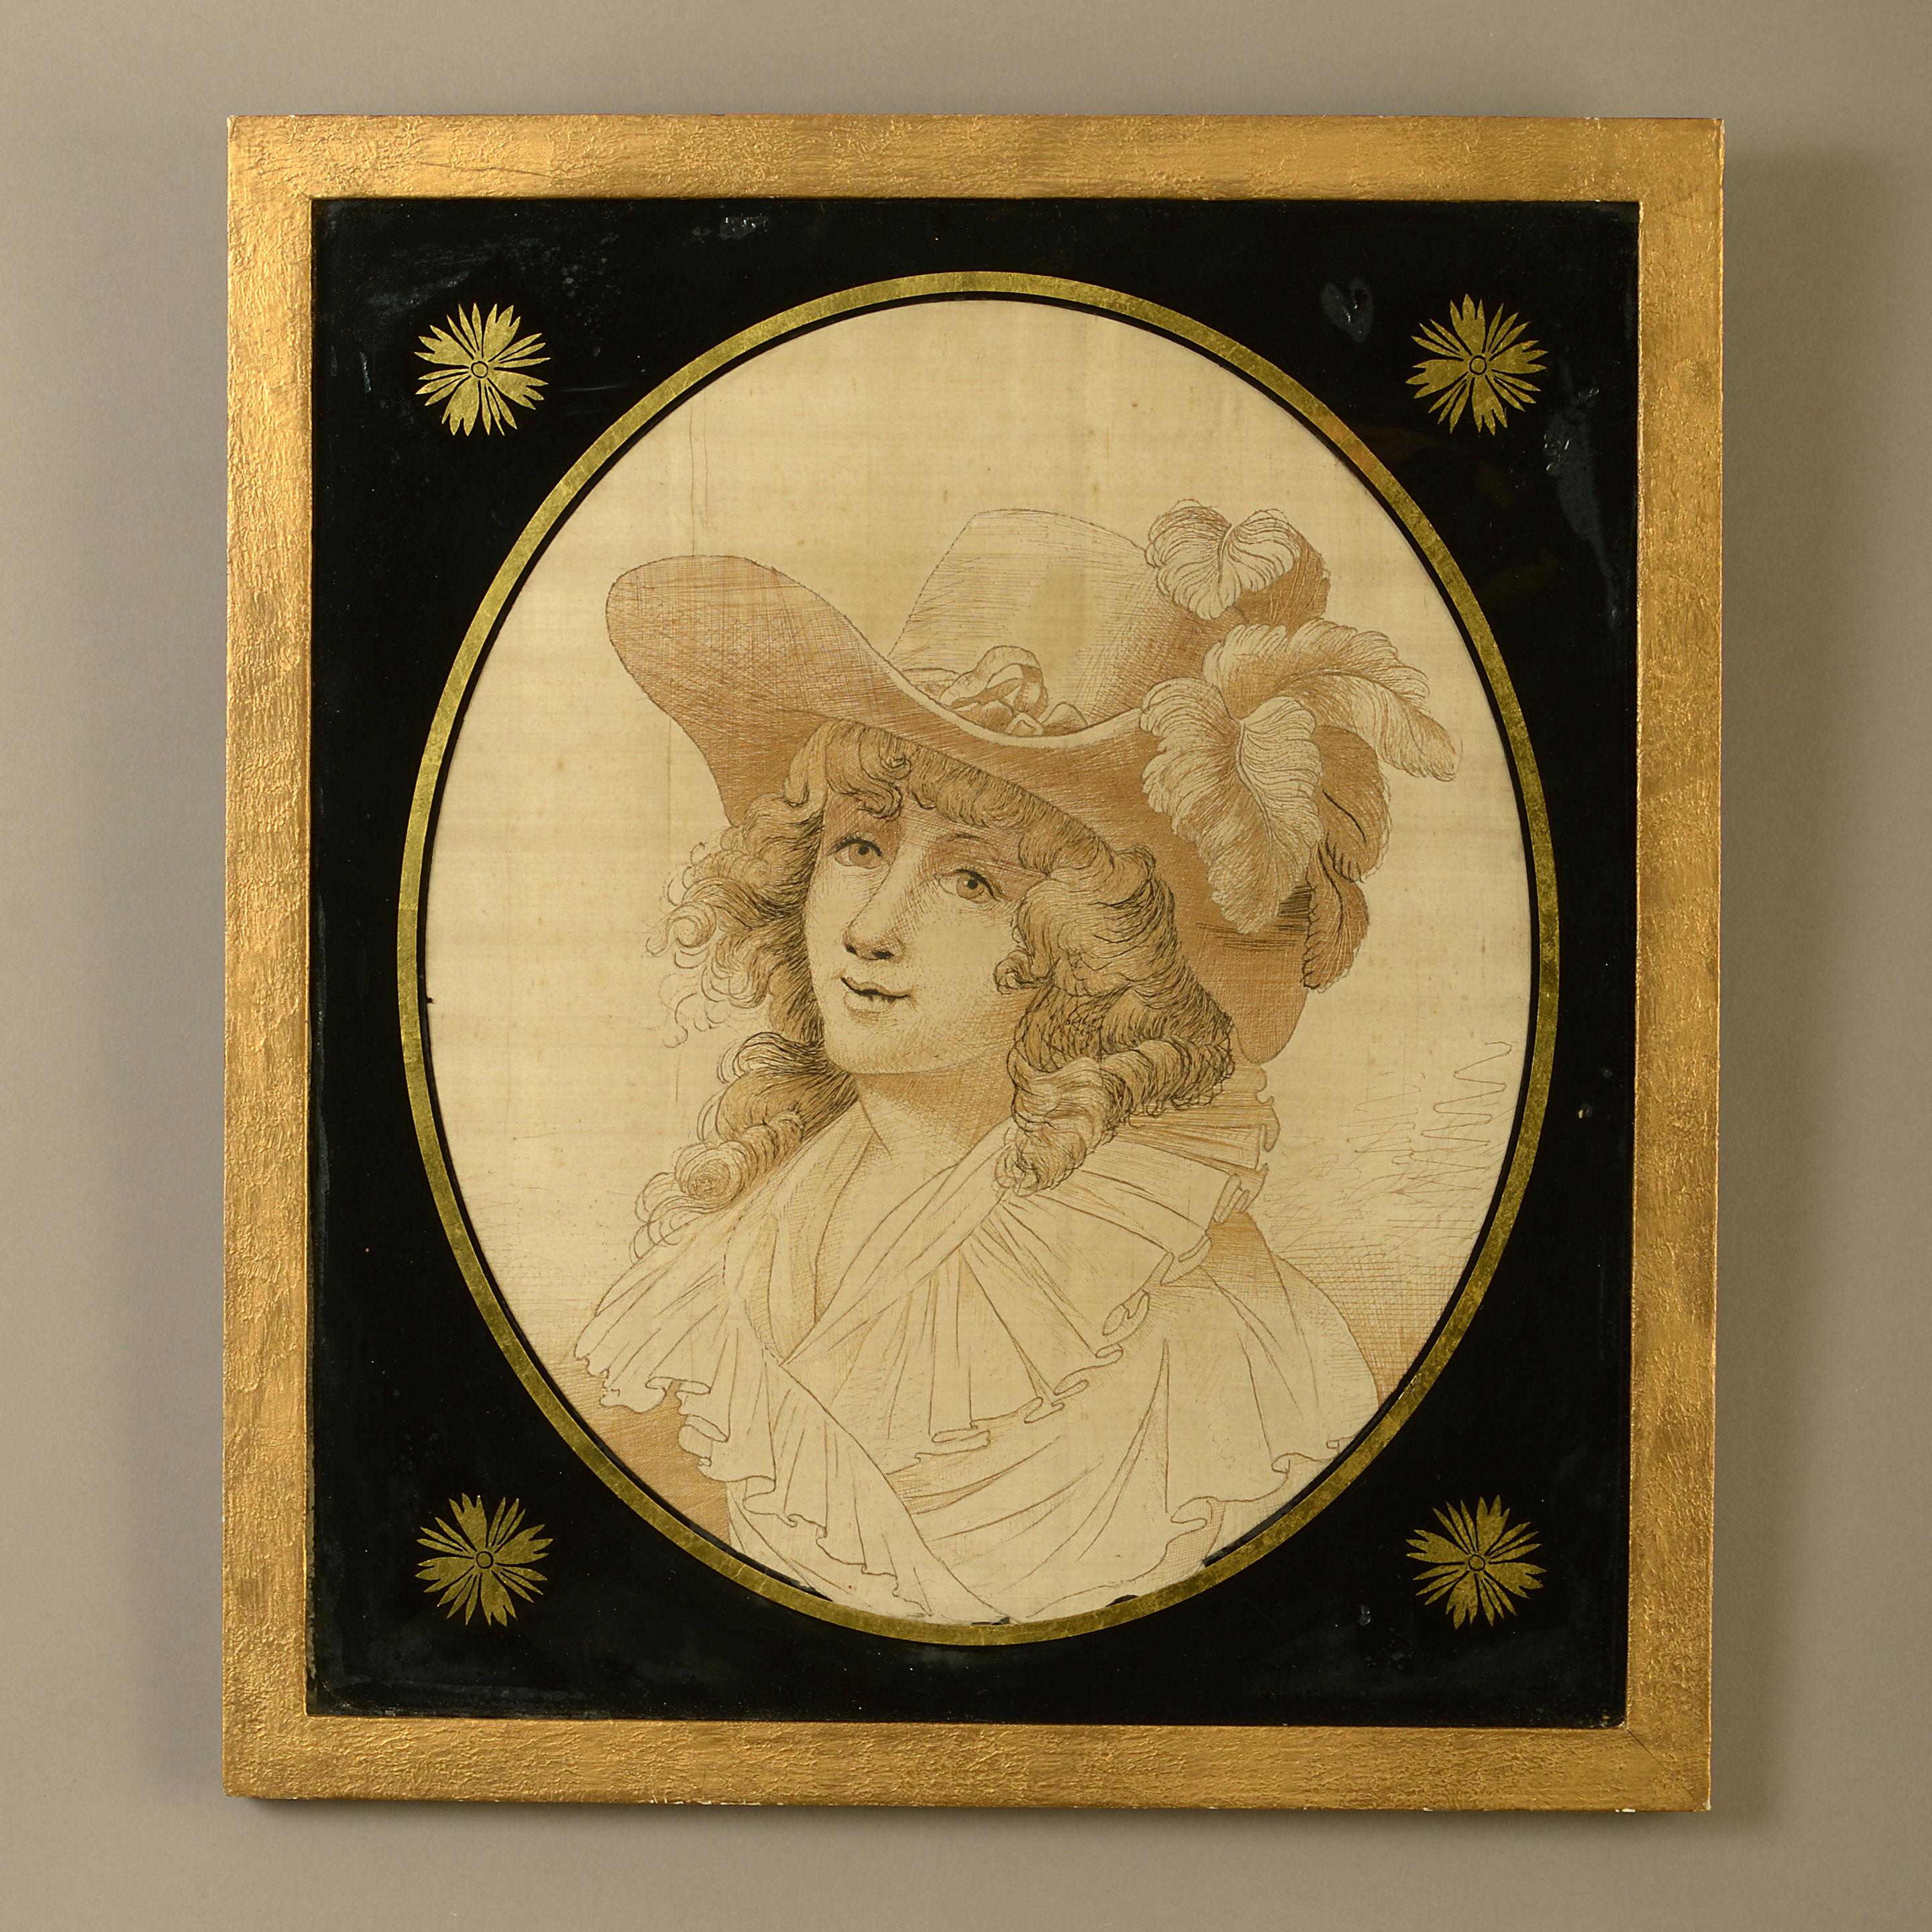 A fine and rare late 18th century silk work portrait of a young lady. Set within the original verre eglomisé mount. 

Dimensions refer to size of frame.